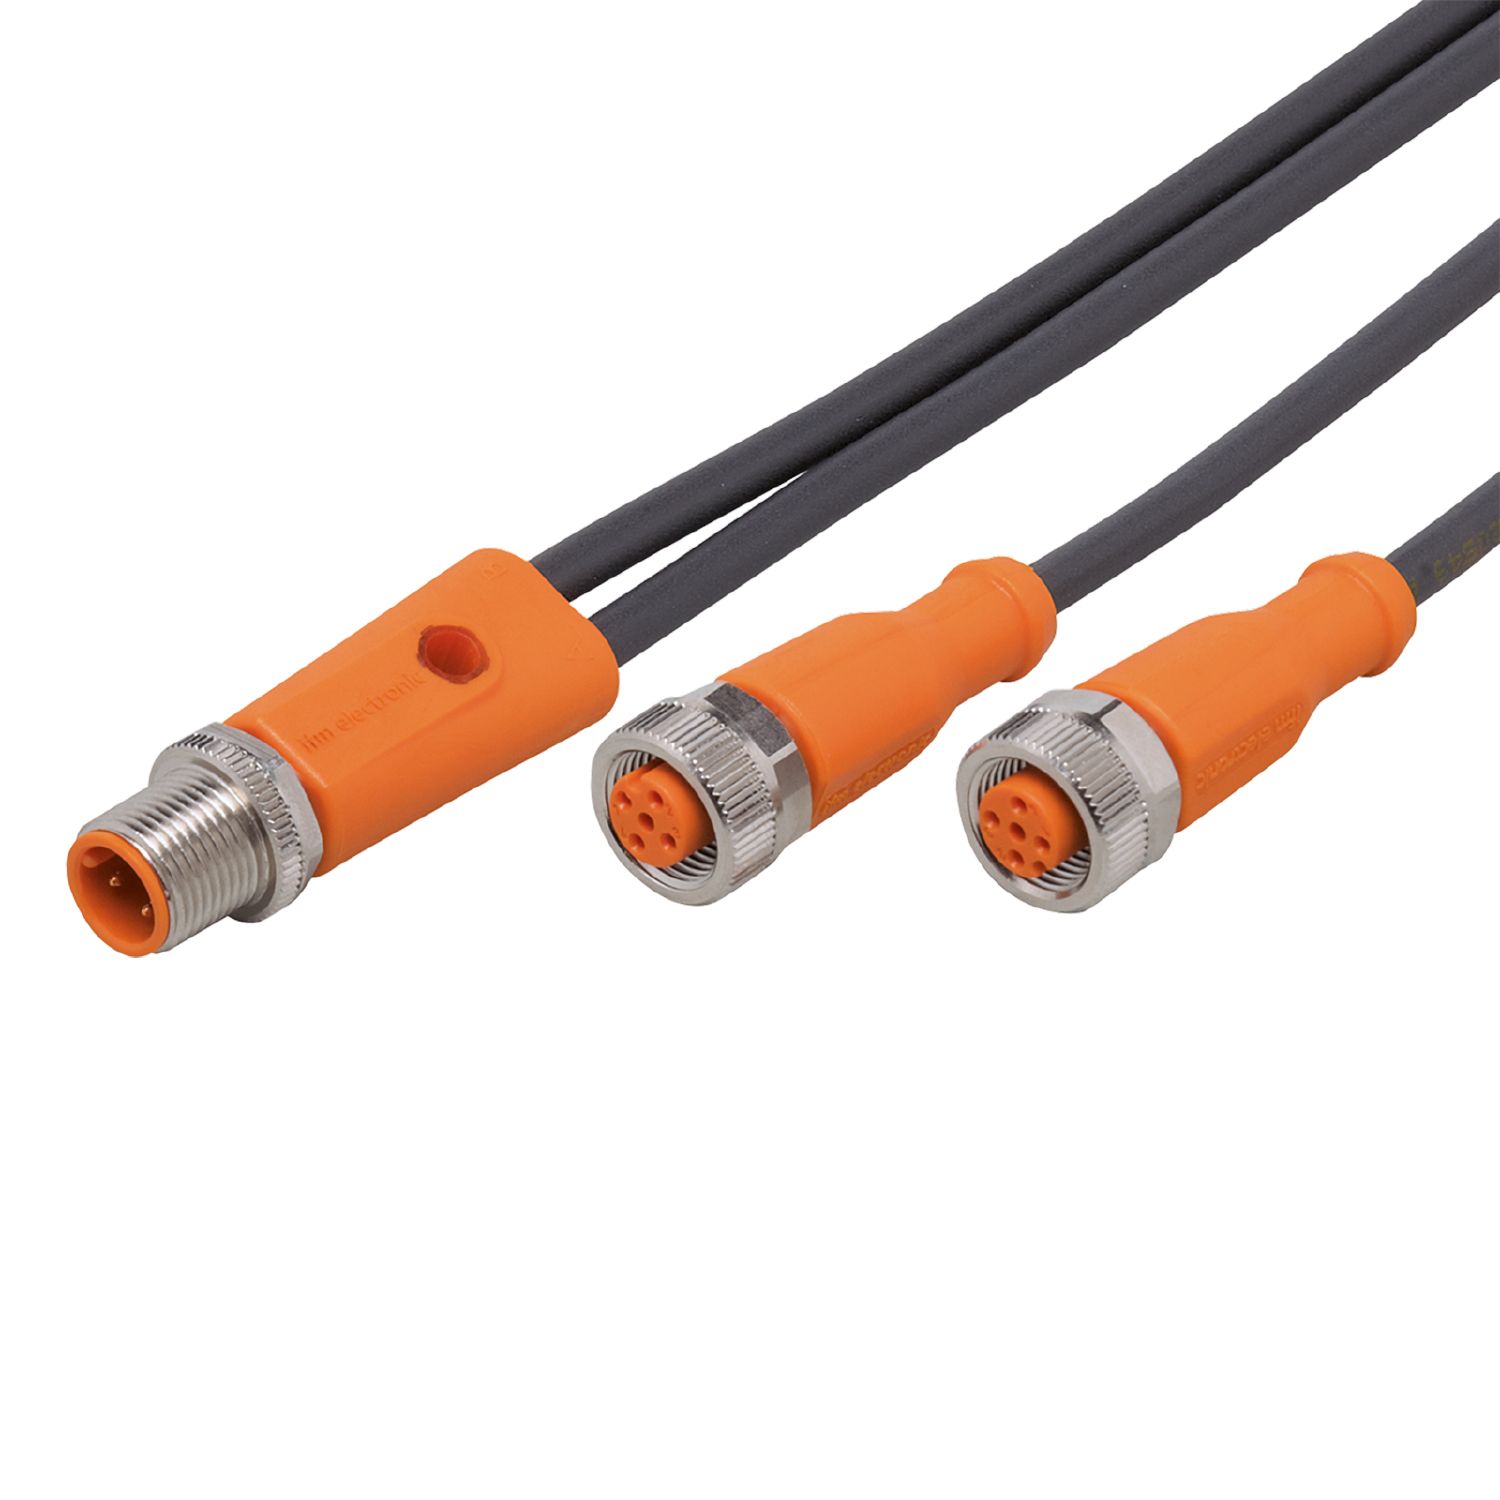 EVC847 - Y connection cable for trigger - ifm